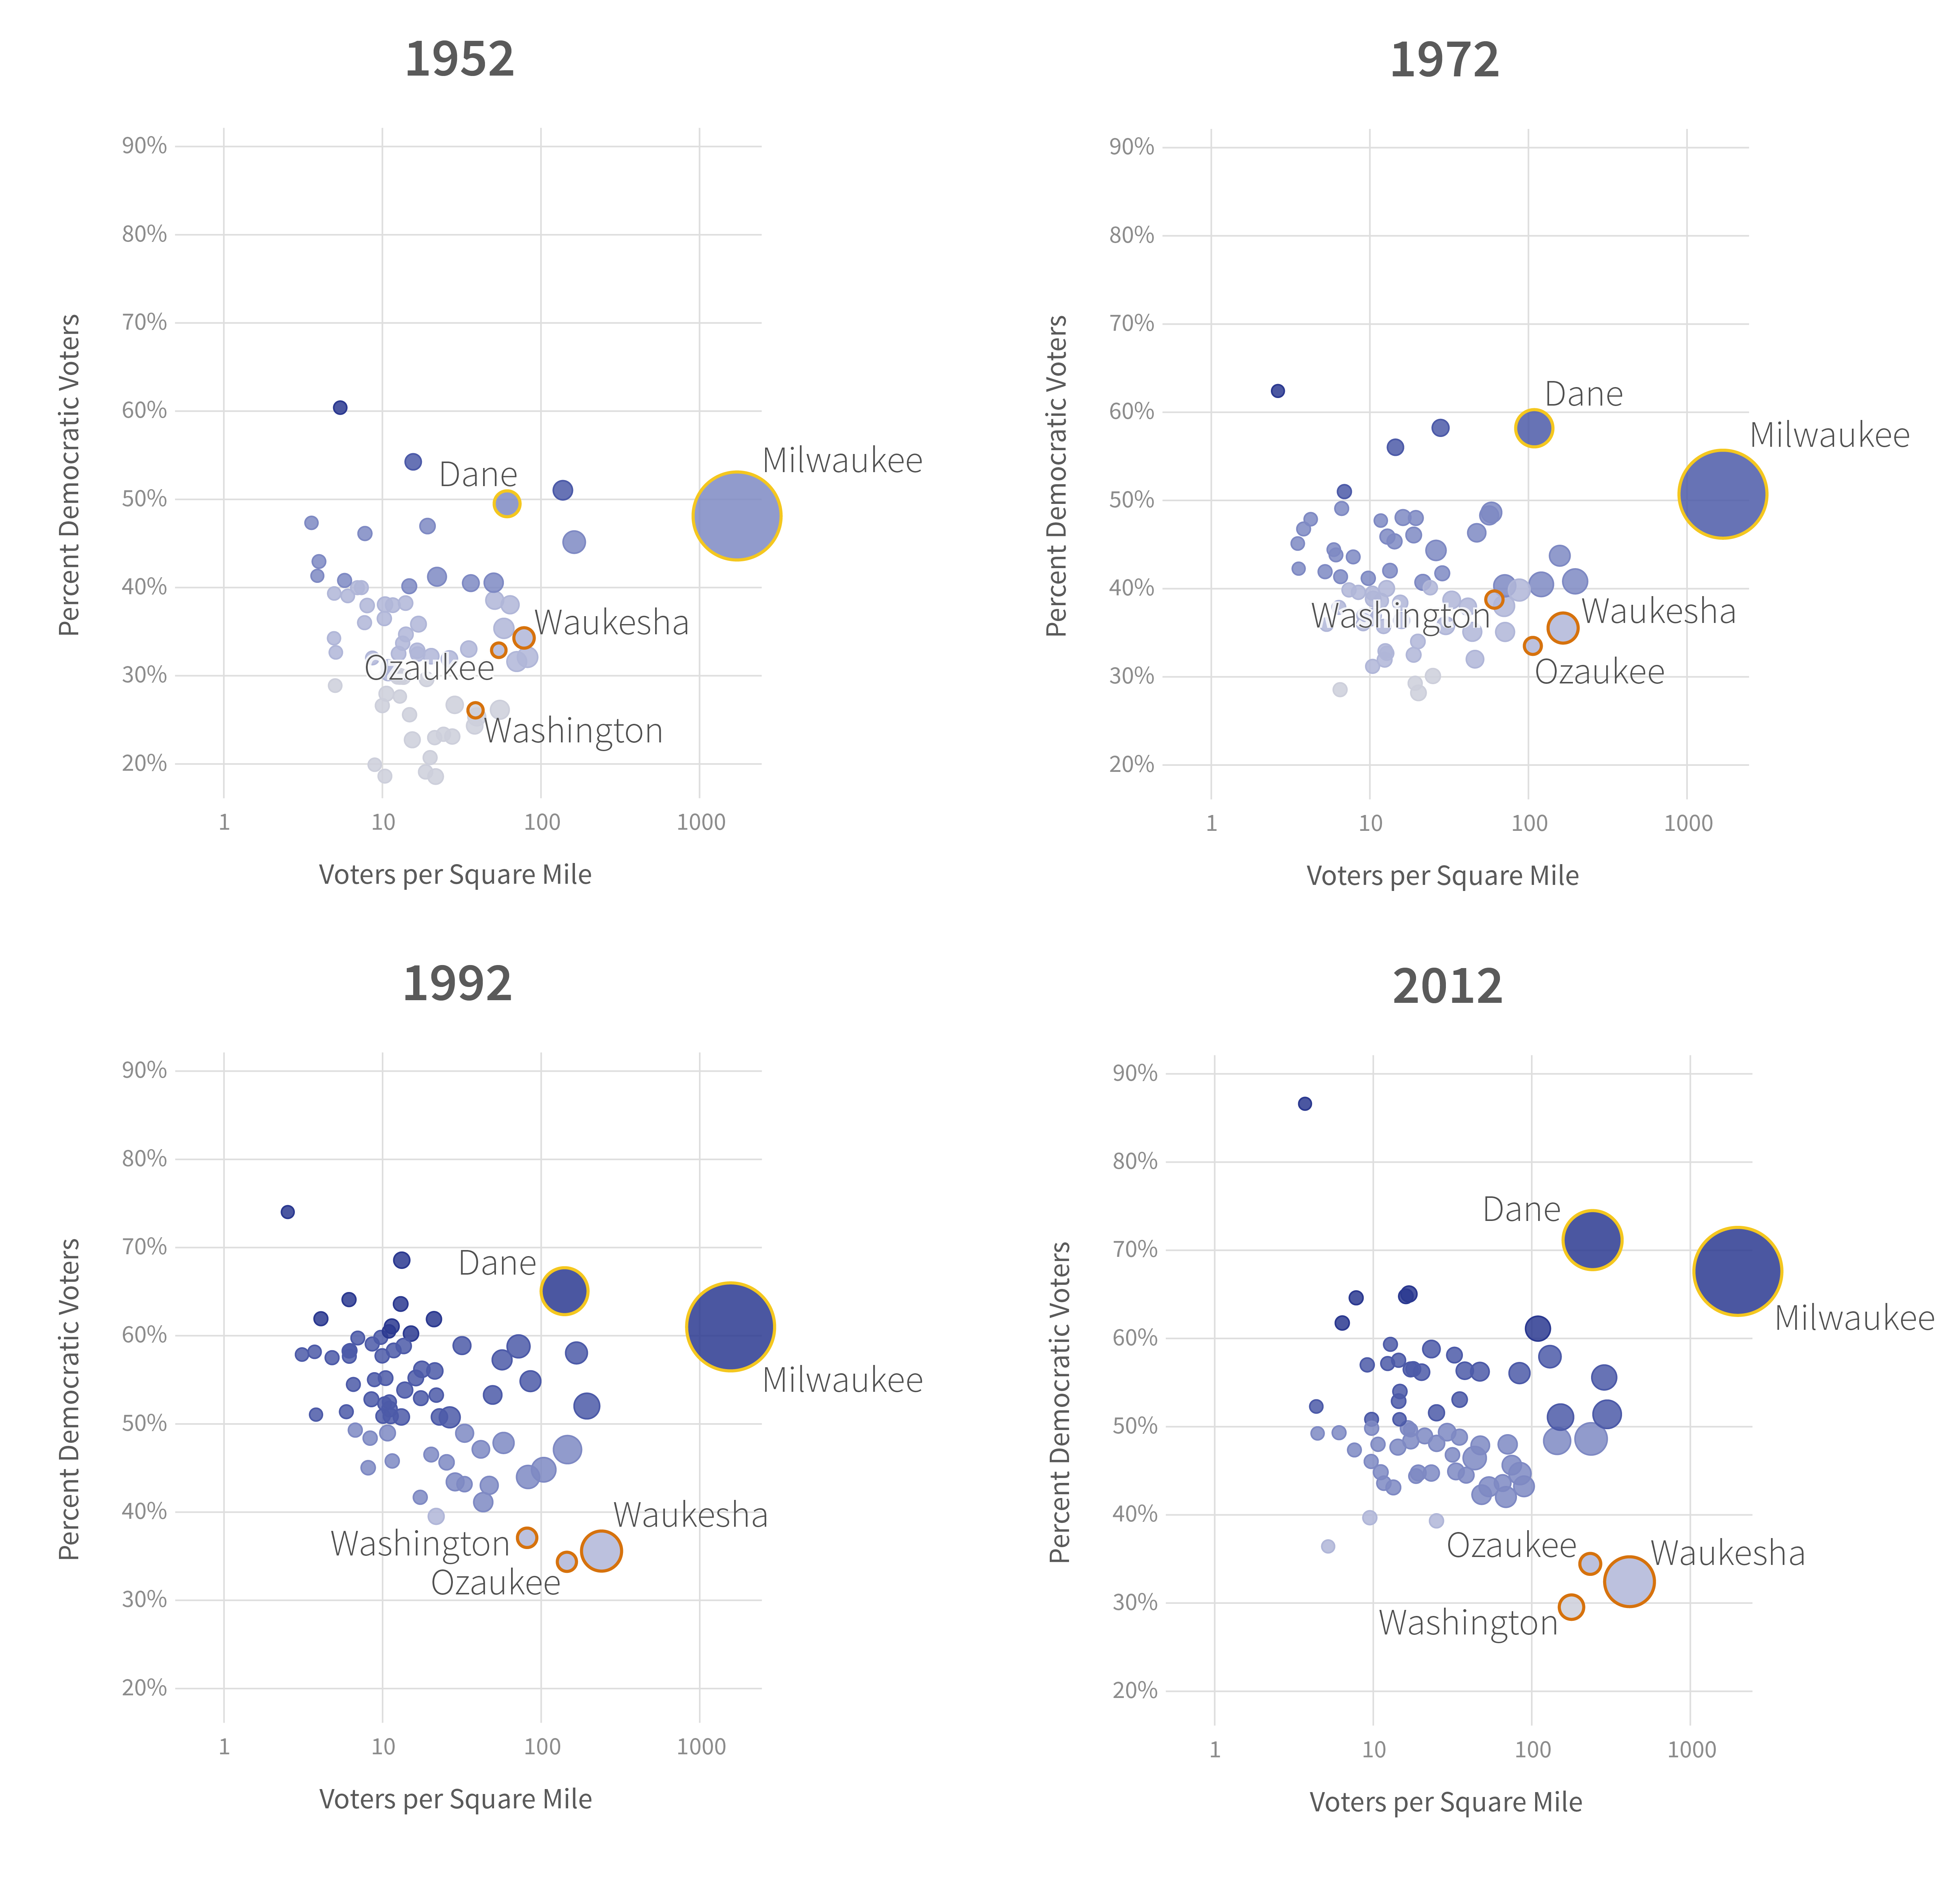 scatter plots comparing Wisconsin density of voters per square mile with the percentage of votes for the Democratic candidate in 1952, 1972, 1992, and 2012 presidential elections